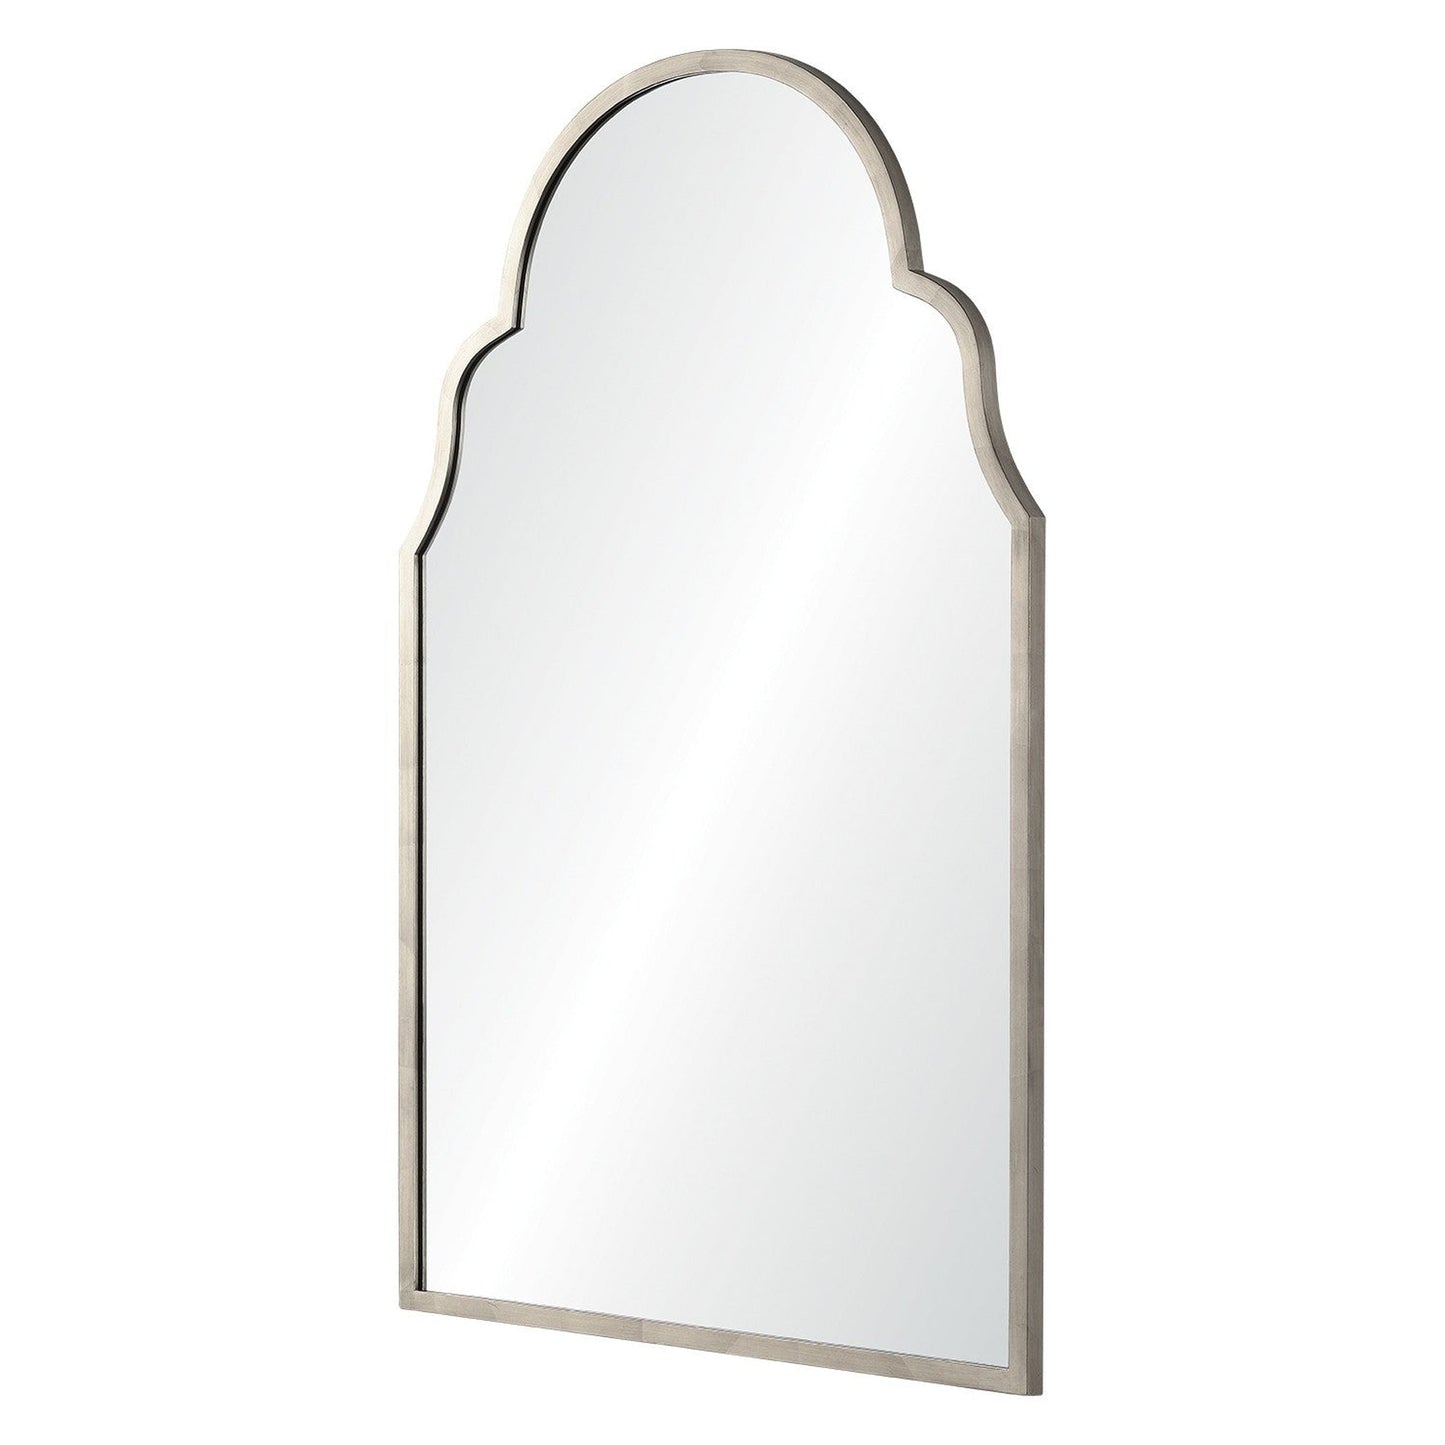 Mirror Home 32" x 52" Hand welded iron arc bathroom mirror finished in antiqued silver leaf.